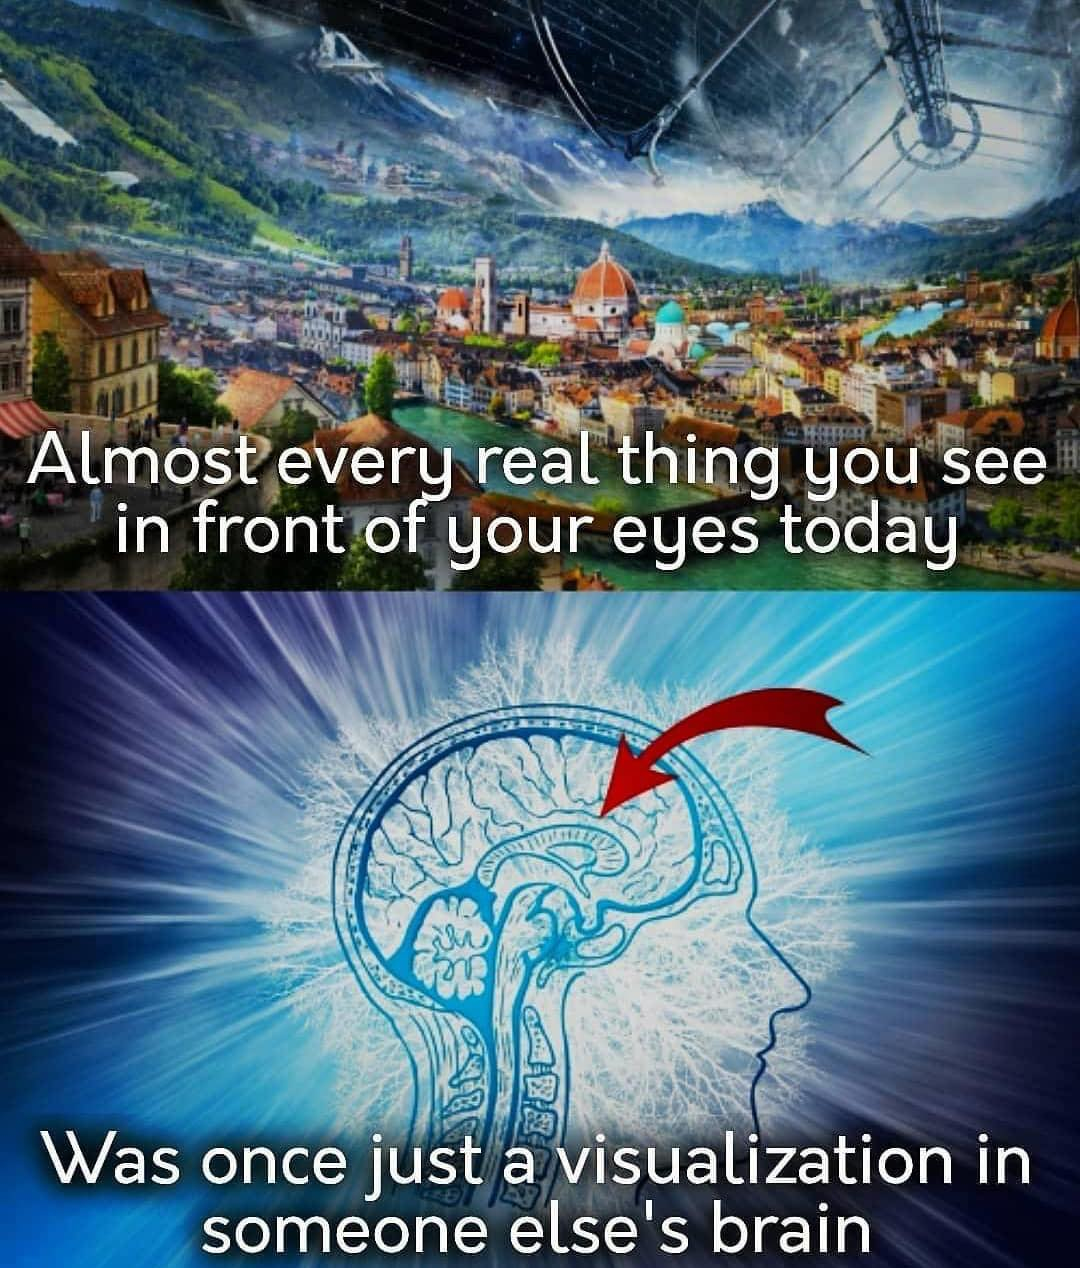 Almost every real thing you see in front of your eyes today was once just a visualization in someone else's brain.